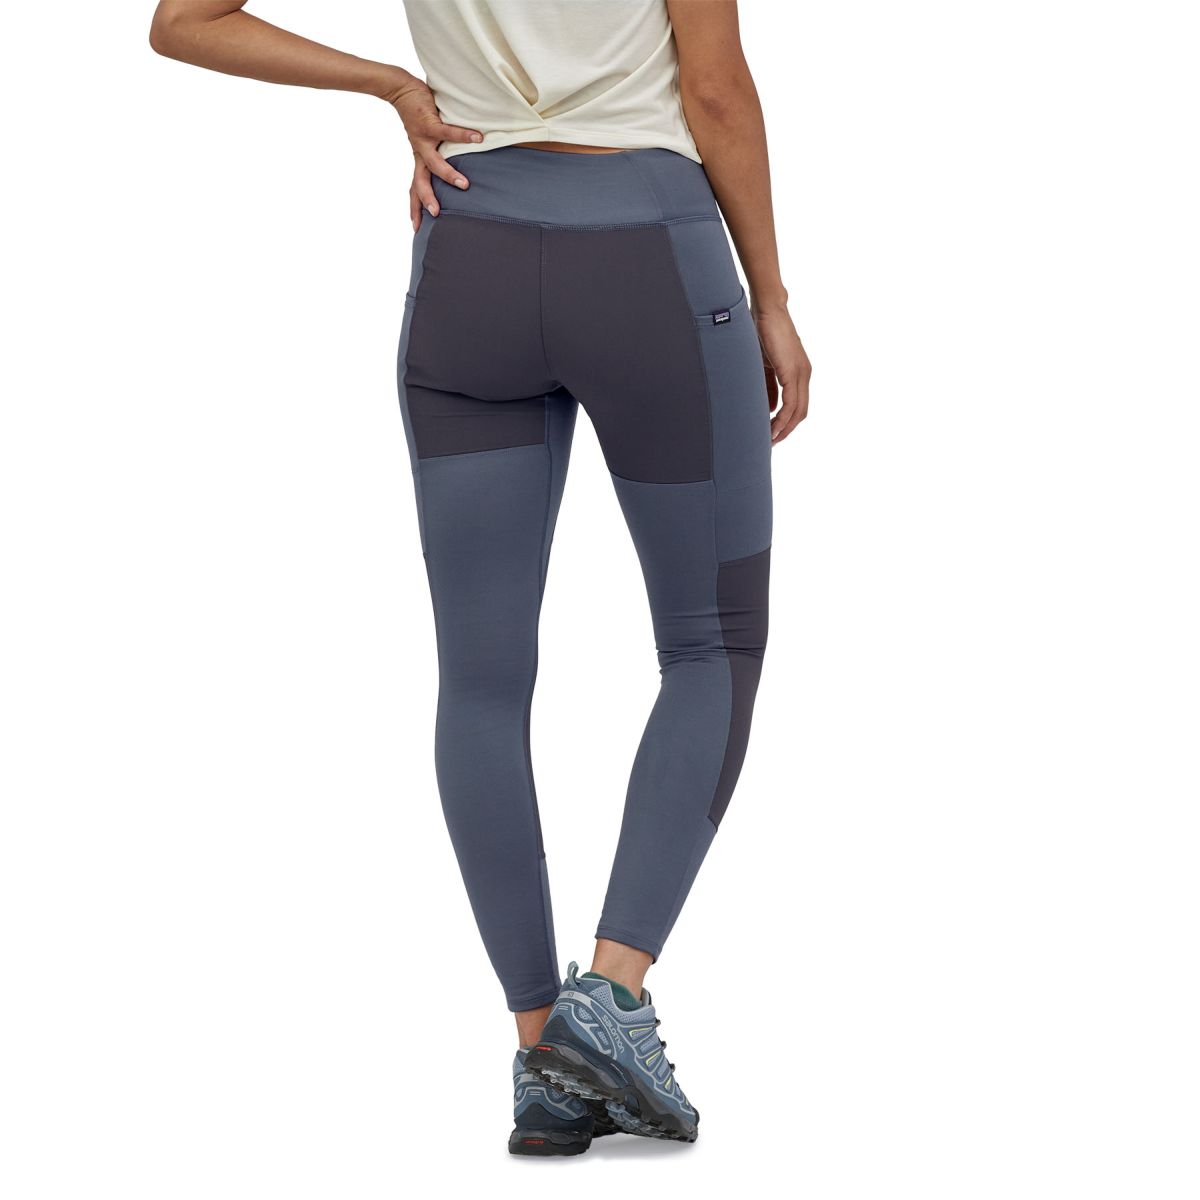 Patagonia Pack Out Tights Women's - Tidepool Blue